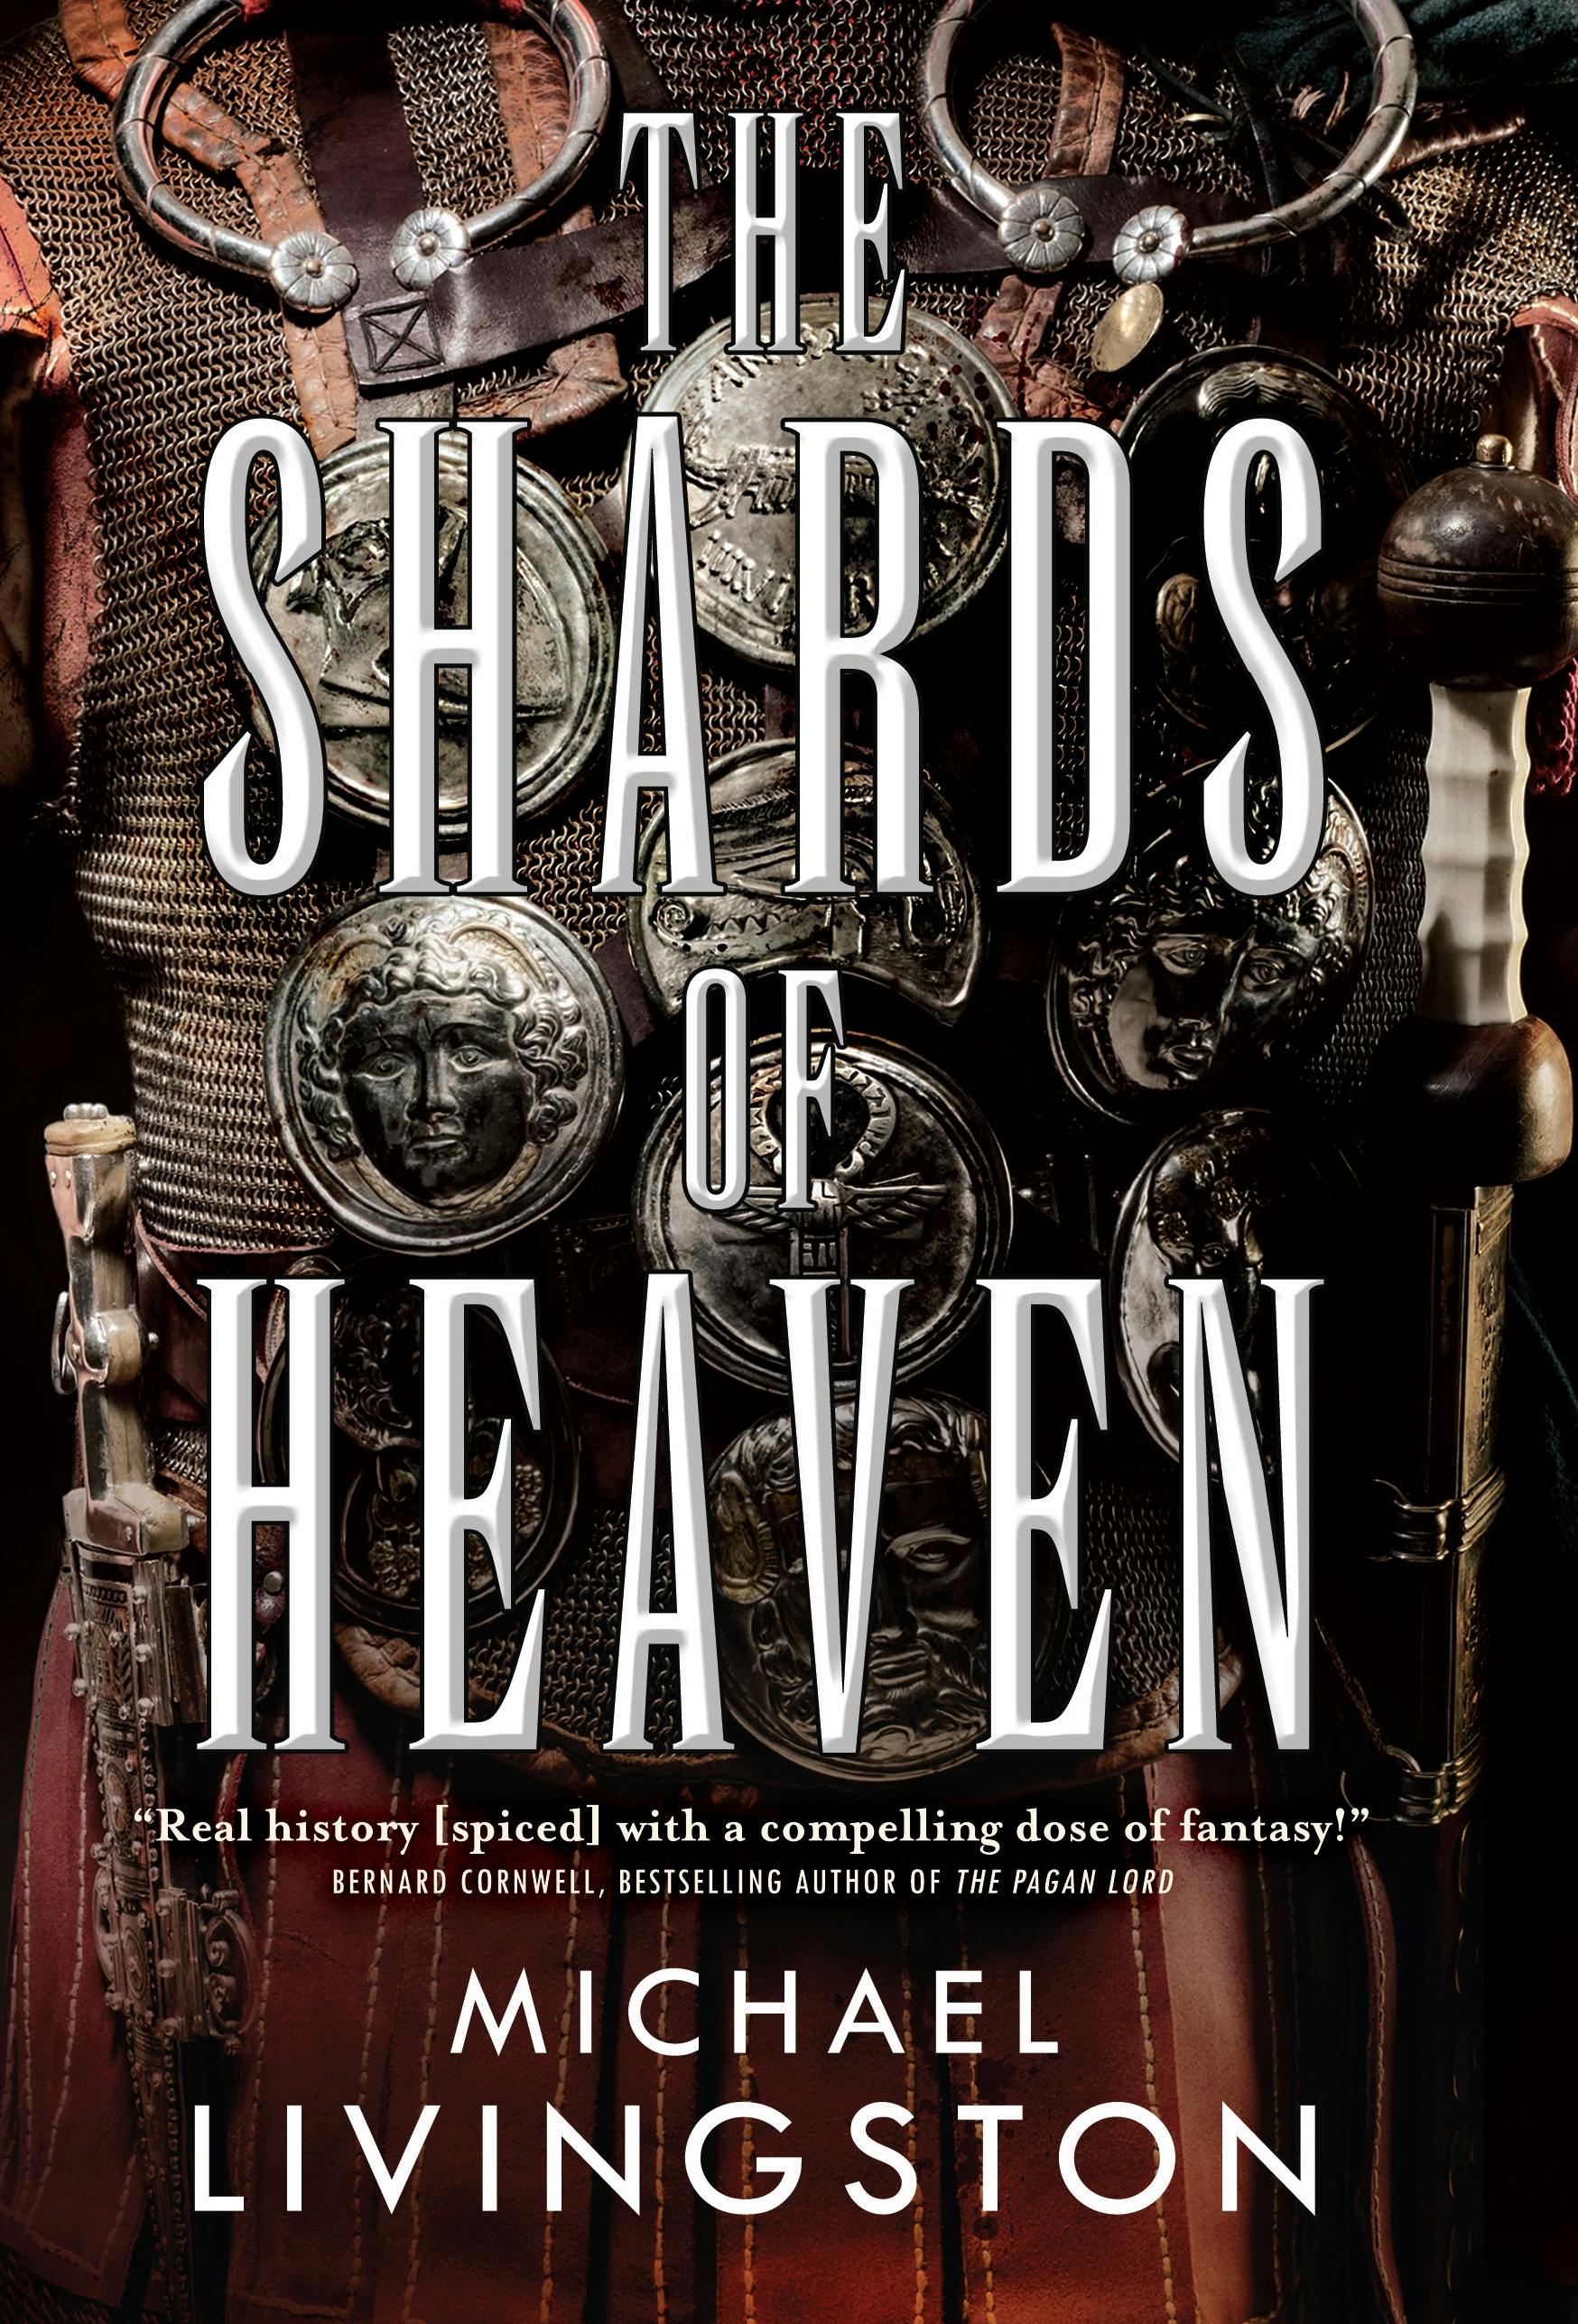 Cover for the book titled as: The Shards of Heaven